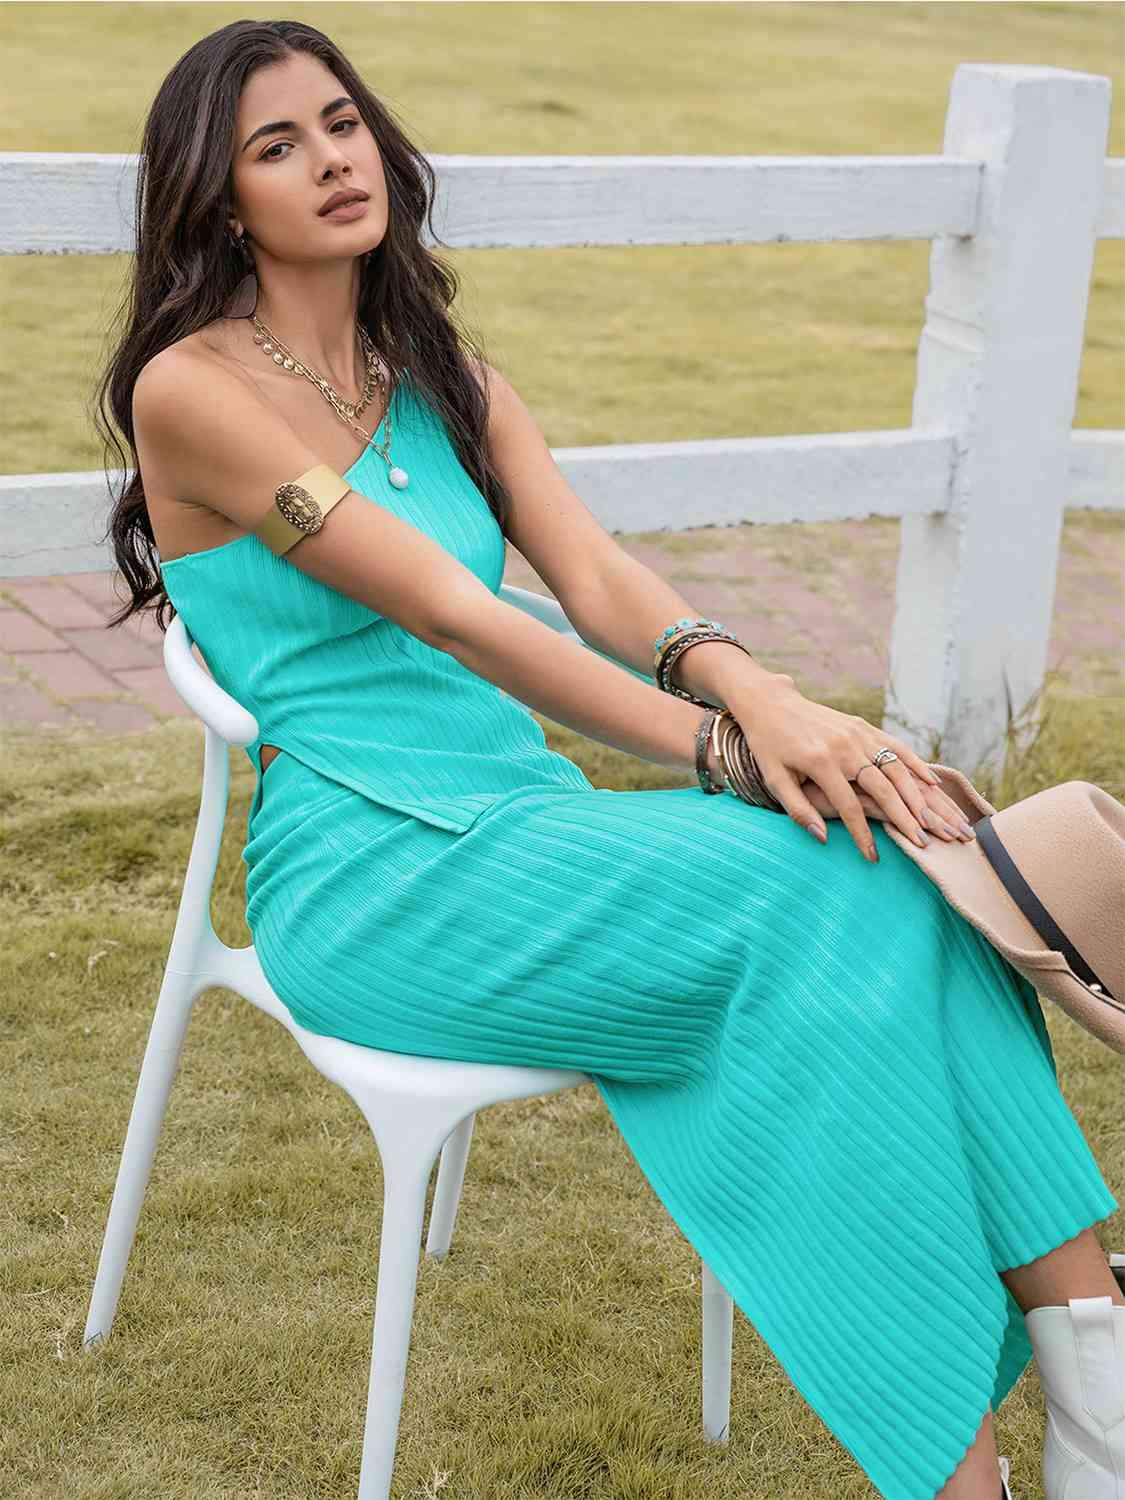 a woman sitting on a chair in a blue dress